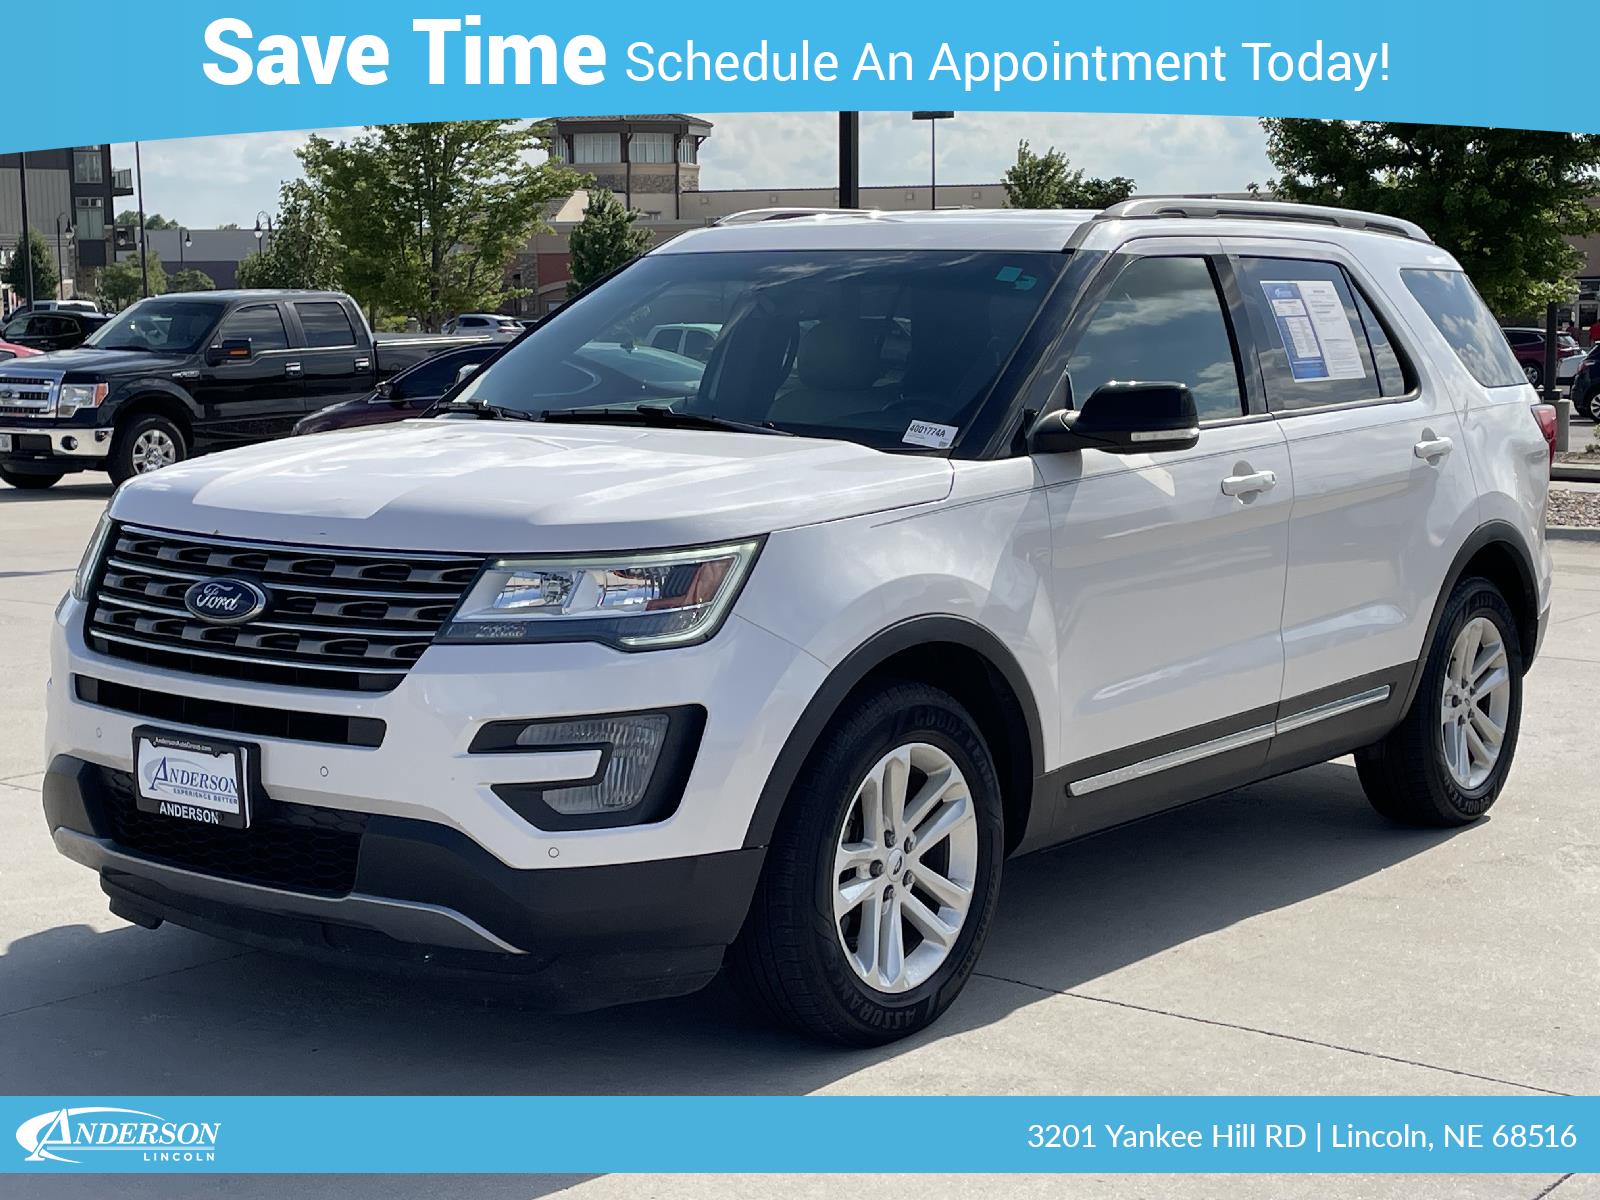 Used 2017 Ford Explorer XLT Stock: 4001774A